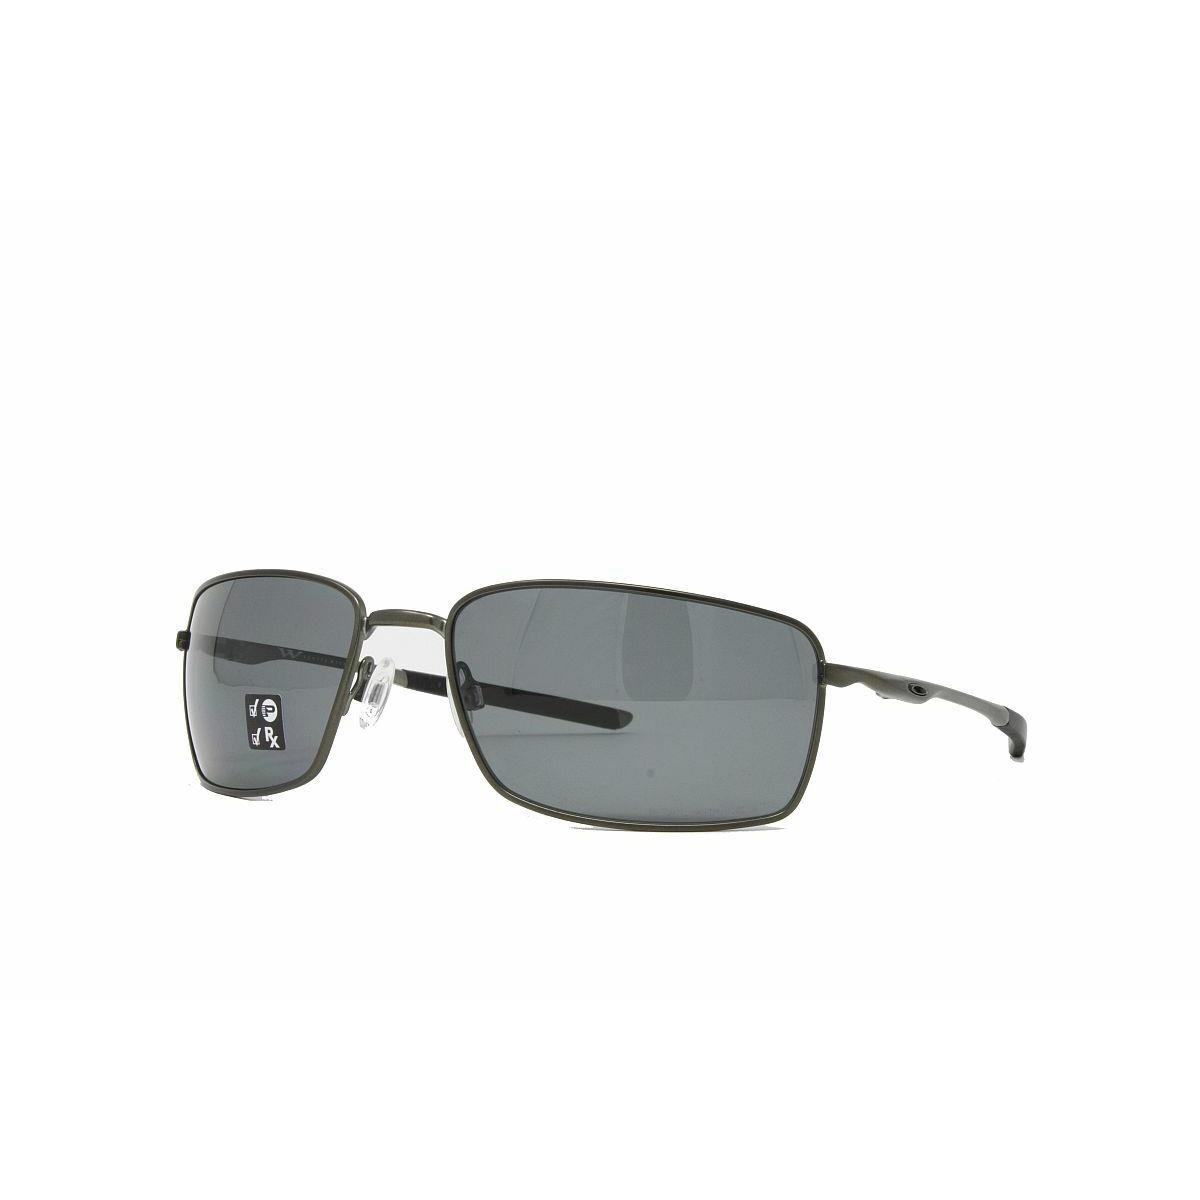 Oakley Sunglasses Men`s Square Wire Carbon OO4075 04 Carbon Polarized 60mm - Gray Frame, Gray Lens